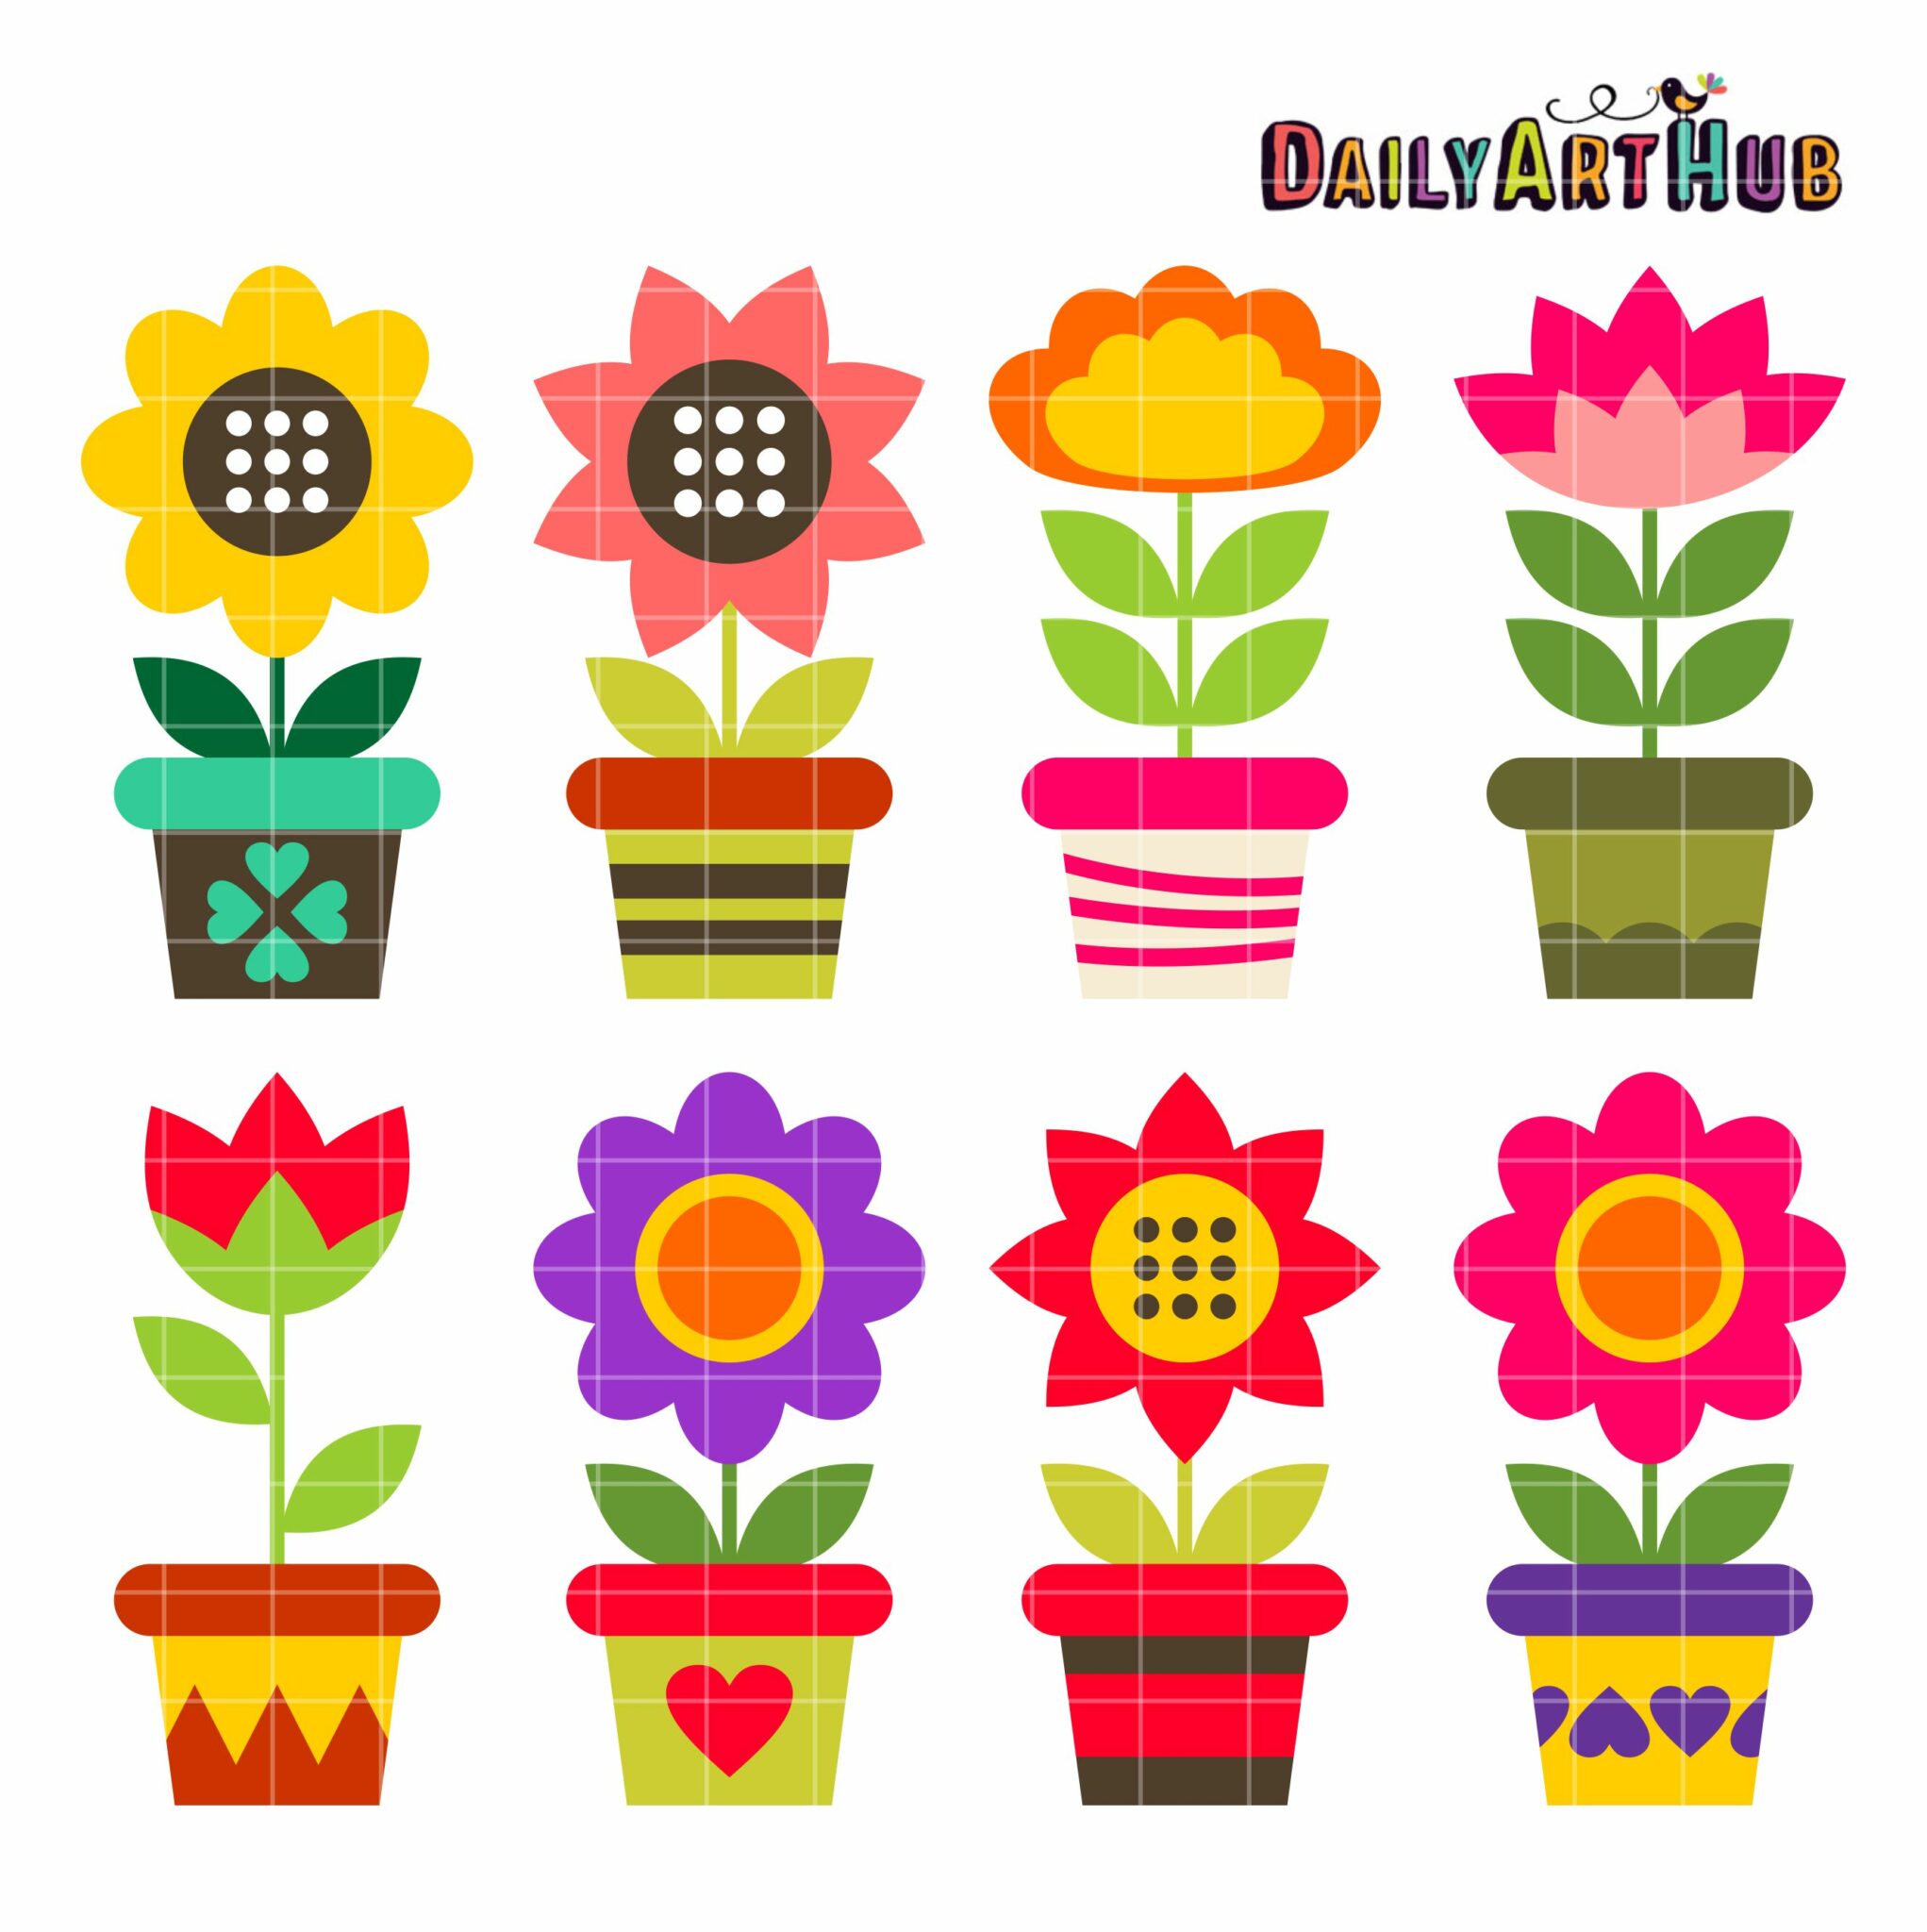 https://www.dailyarthub.com/wp-content/uploads/2015/04/Colorful-Flower-Pots-scaled.jpg